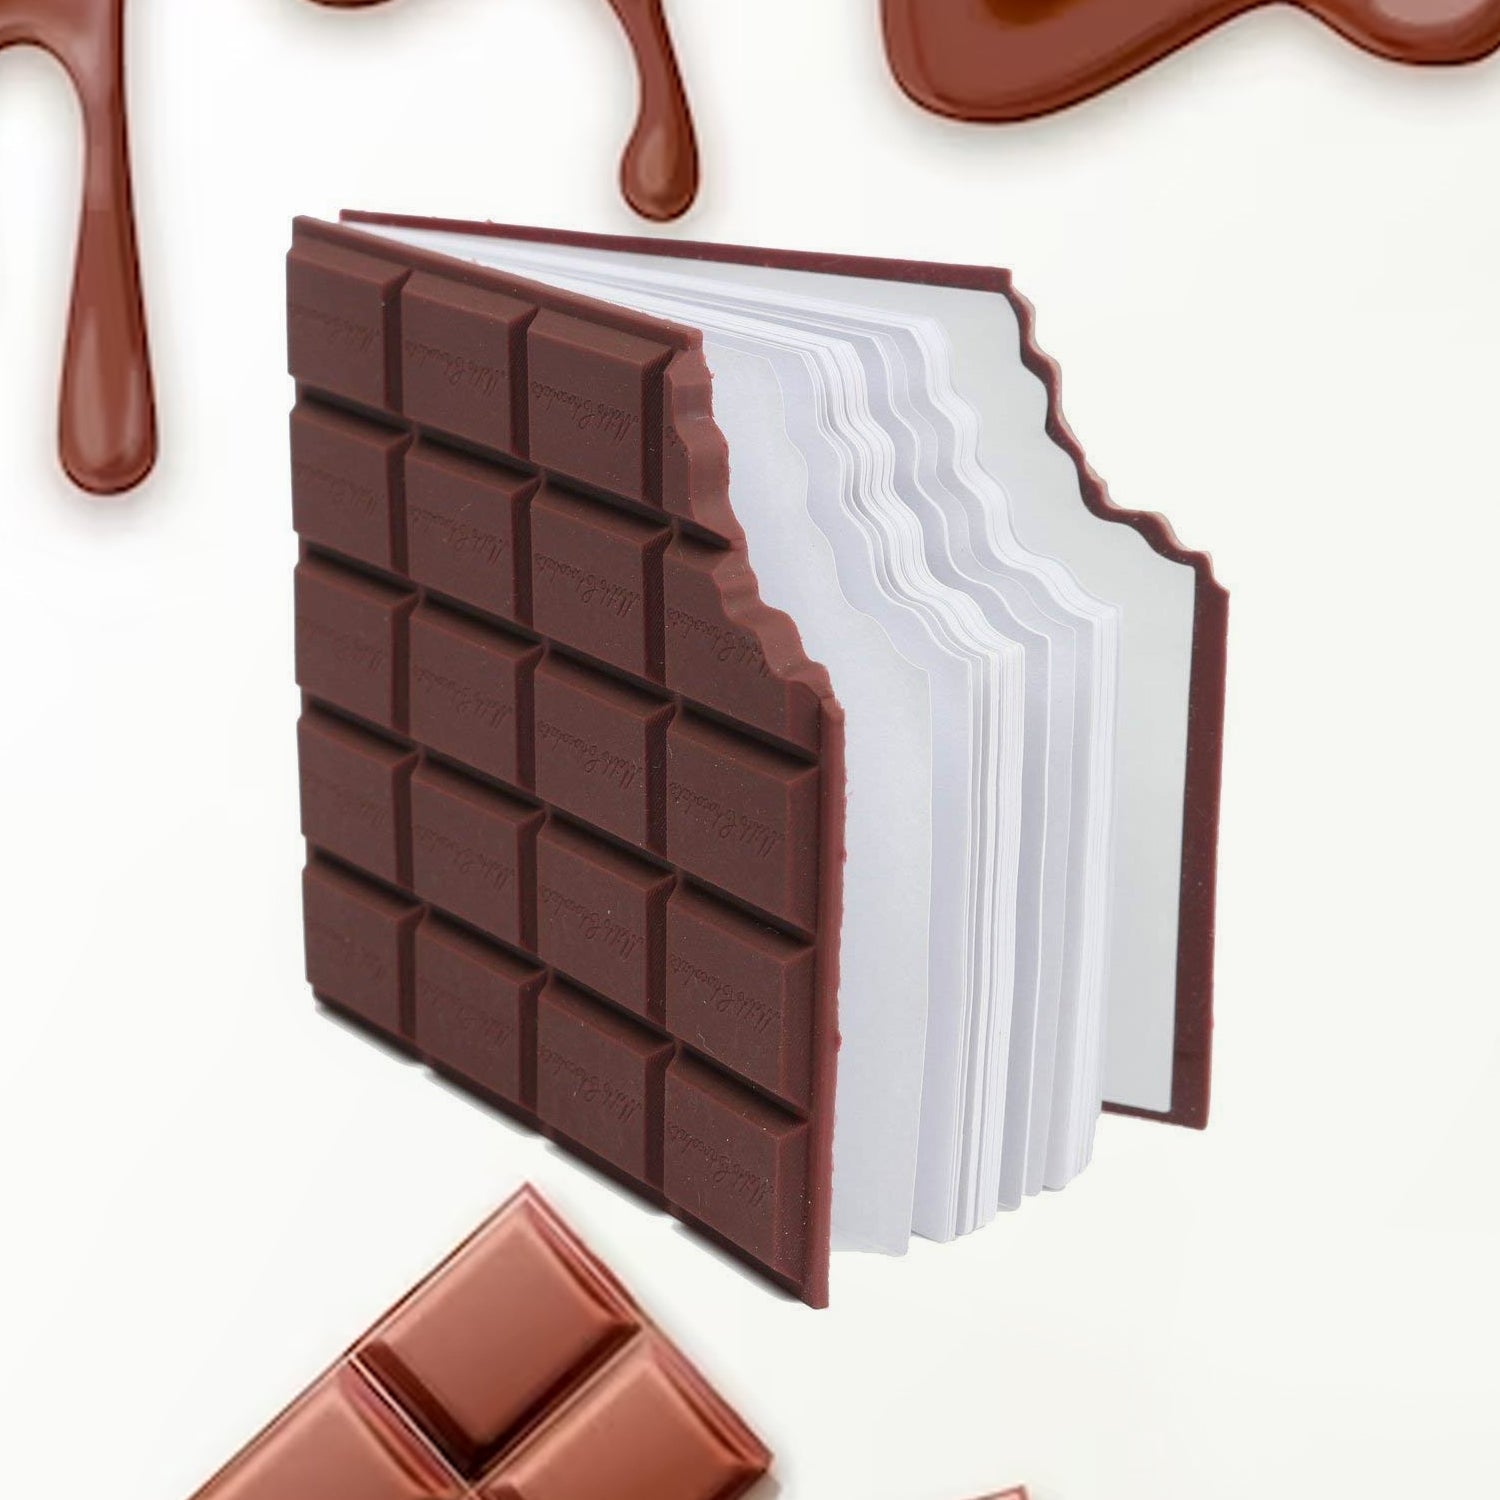 Cocolette: Chocolate Notebook